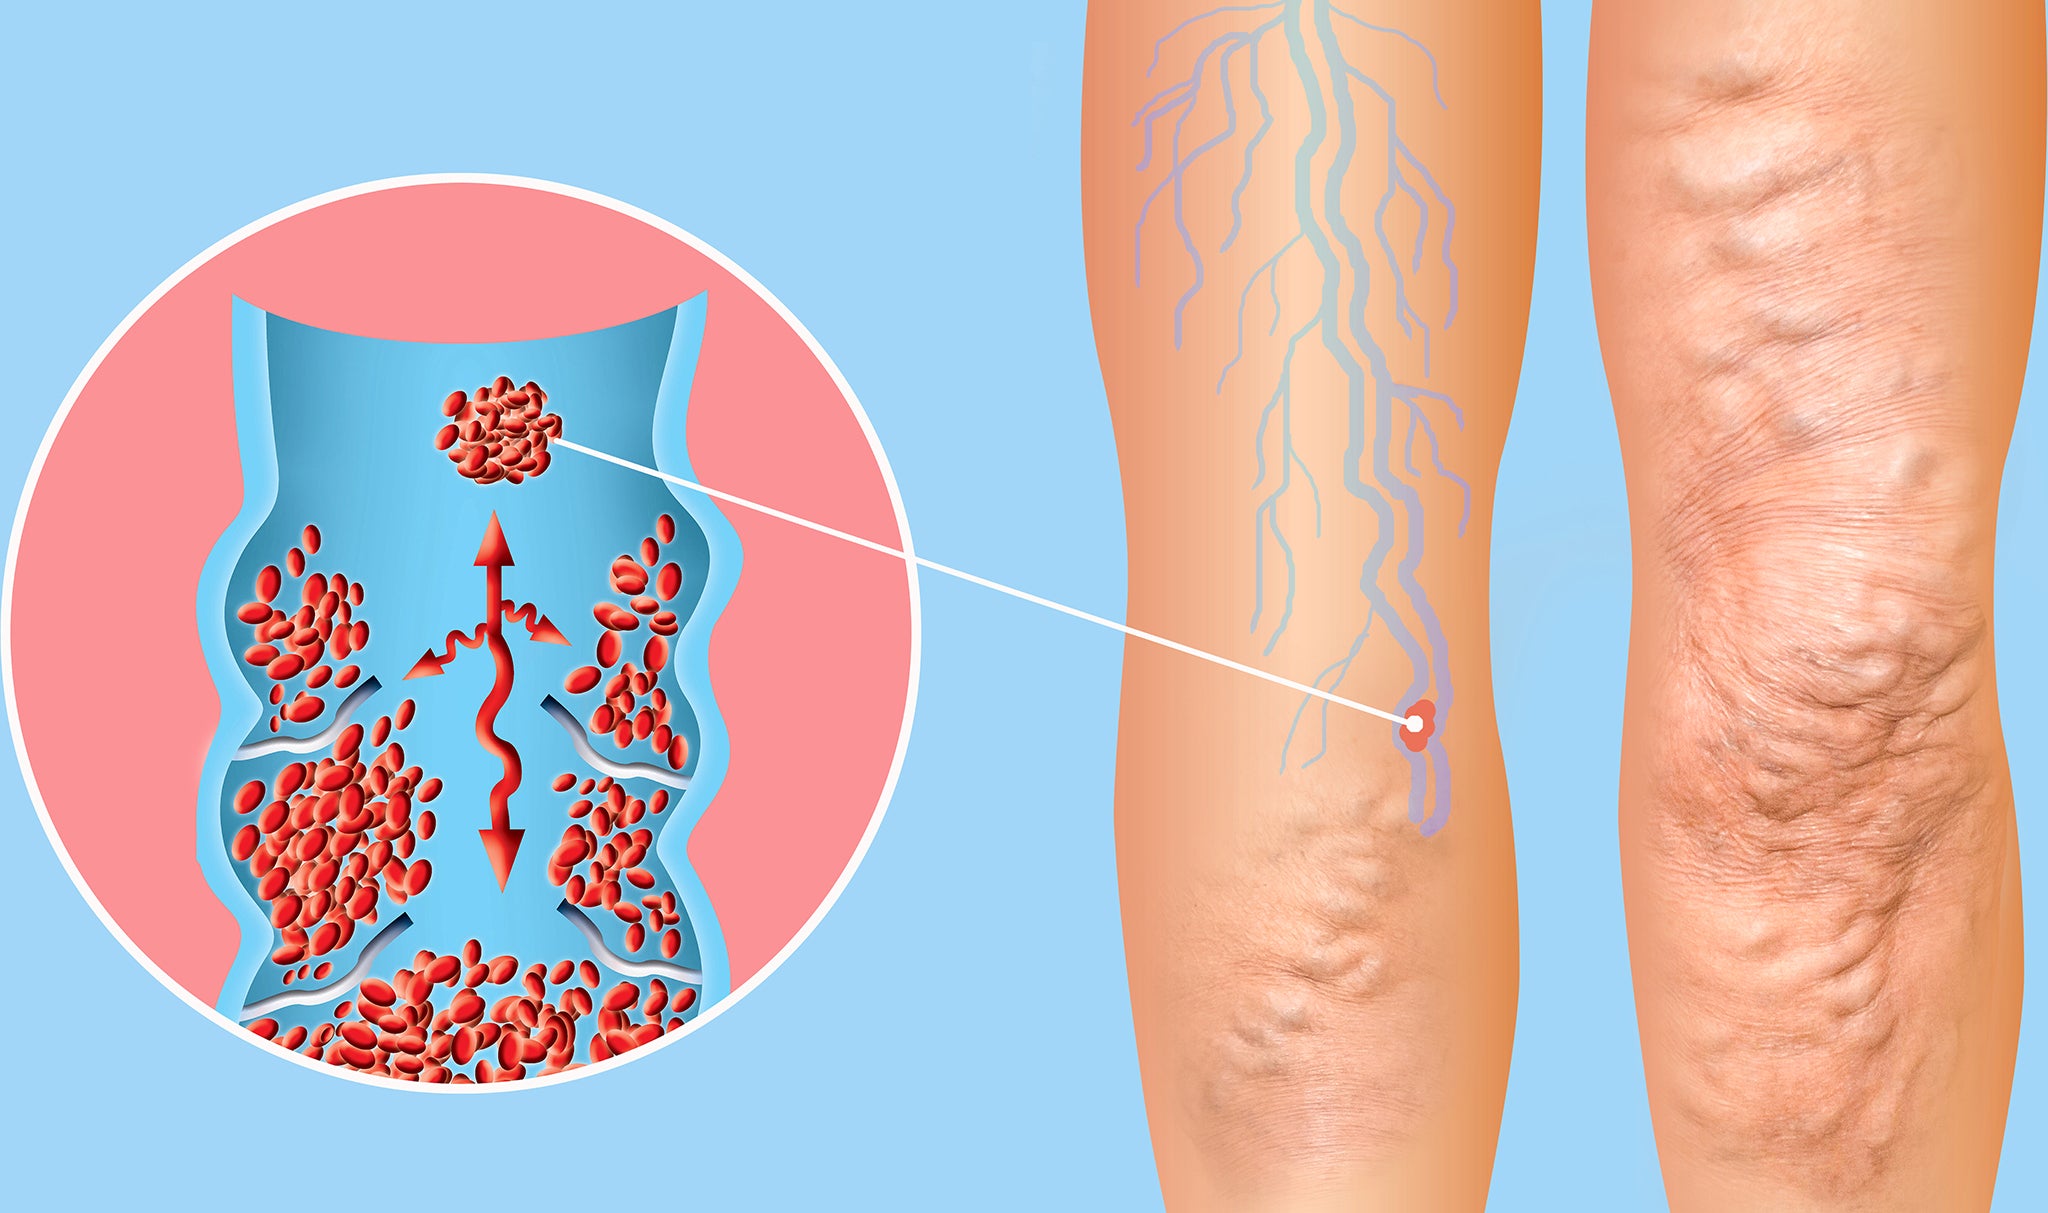 Treatments for varicose veins (III): the secrets of compression